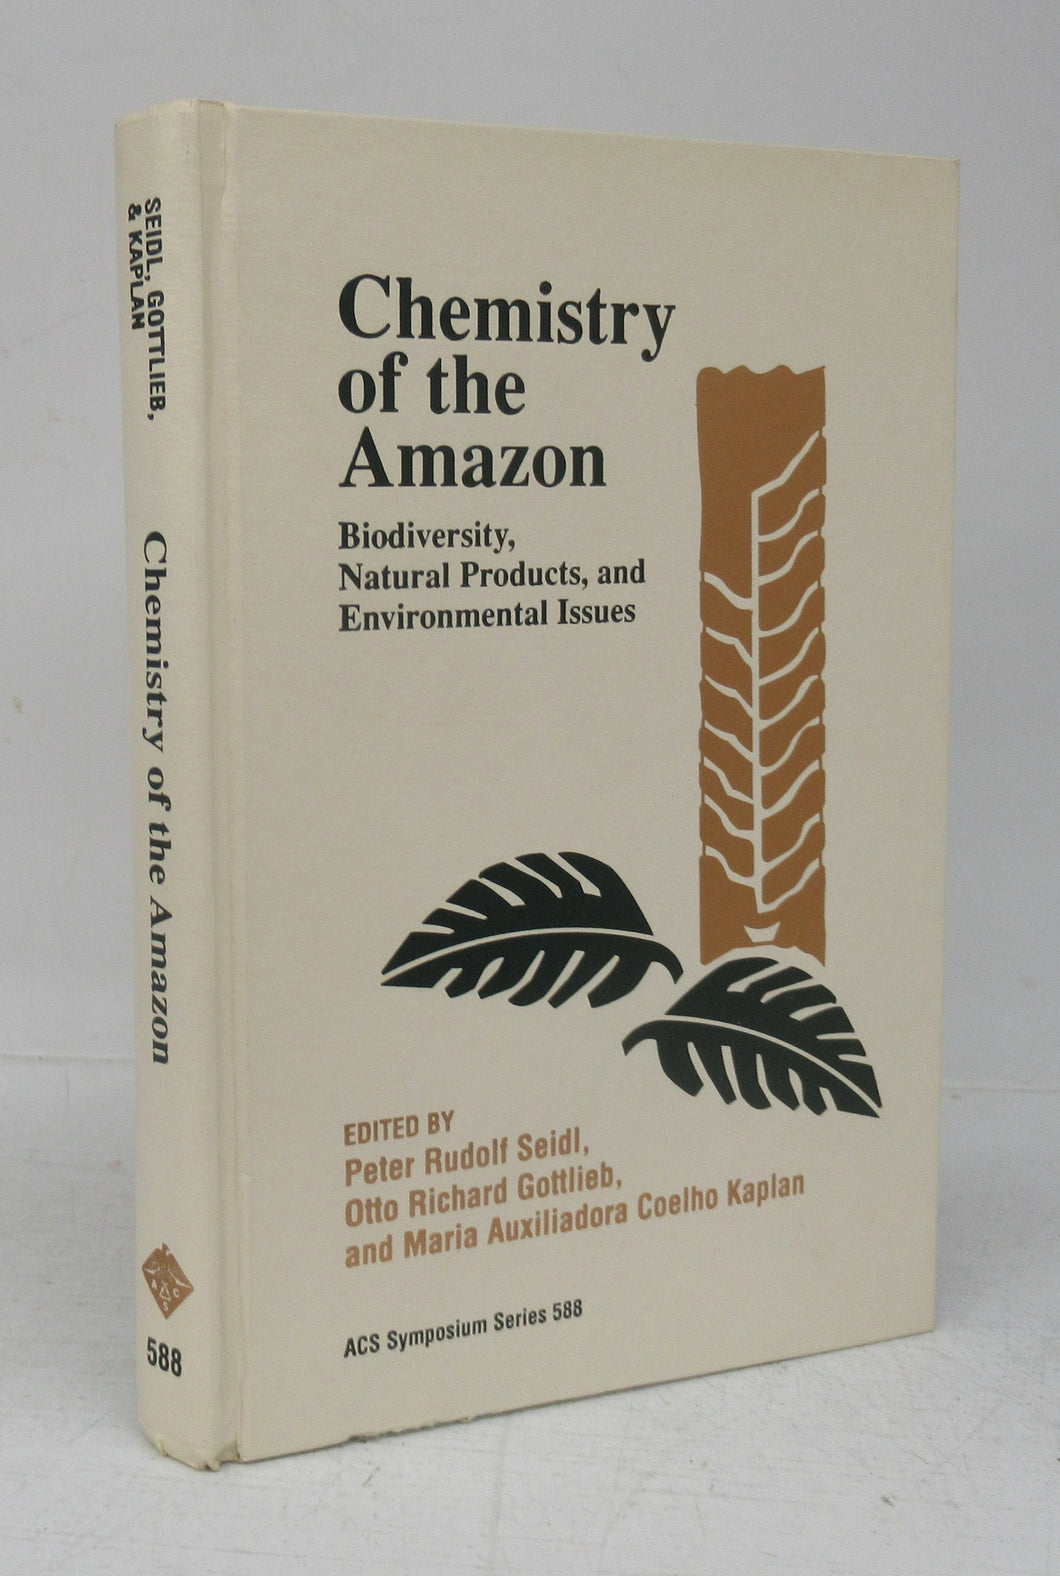 Chemistry of the Amazon: Biodiversity, Natural Products, and Environmental Issues